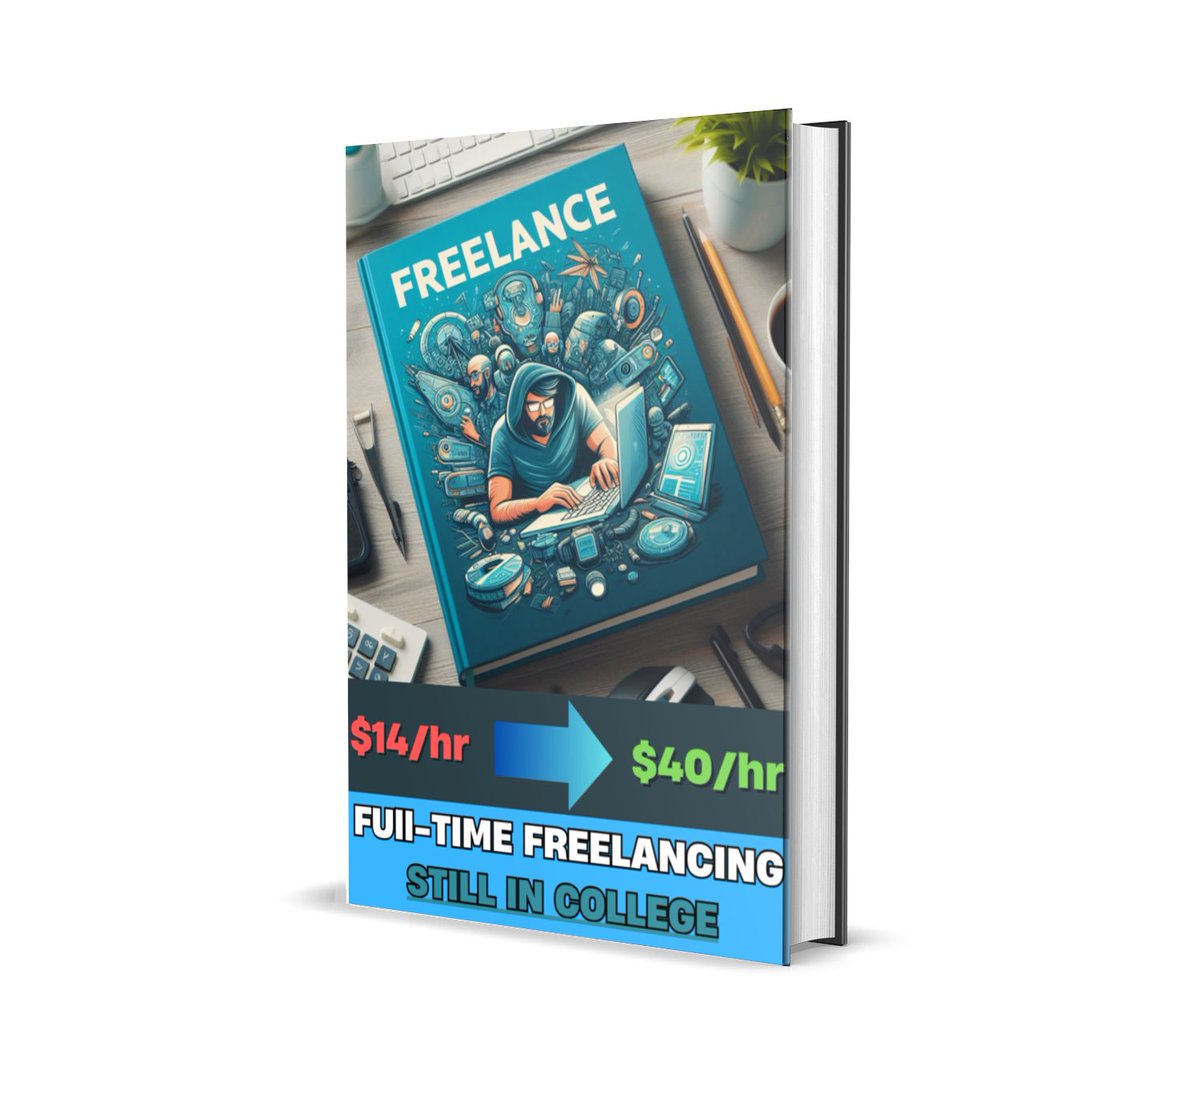 I went from $14 an hour part-time to $40 working on projects I love.

Because I started freelancing my skills in college.

I'm sharing the exact resources on how I went full-time!

Want it for free?

1. Like + Comment 'Freelance'
2. Follow me

I'll send it!

RTs are appreciated!